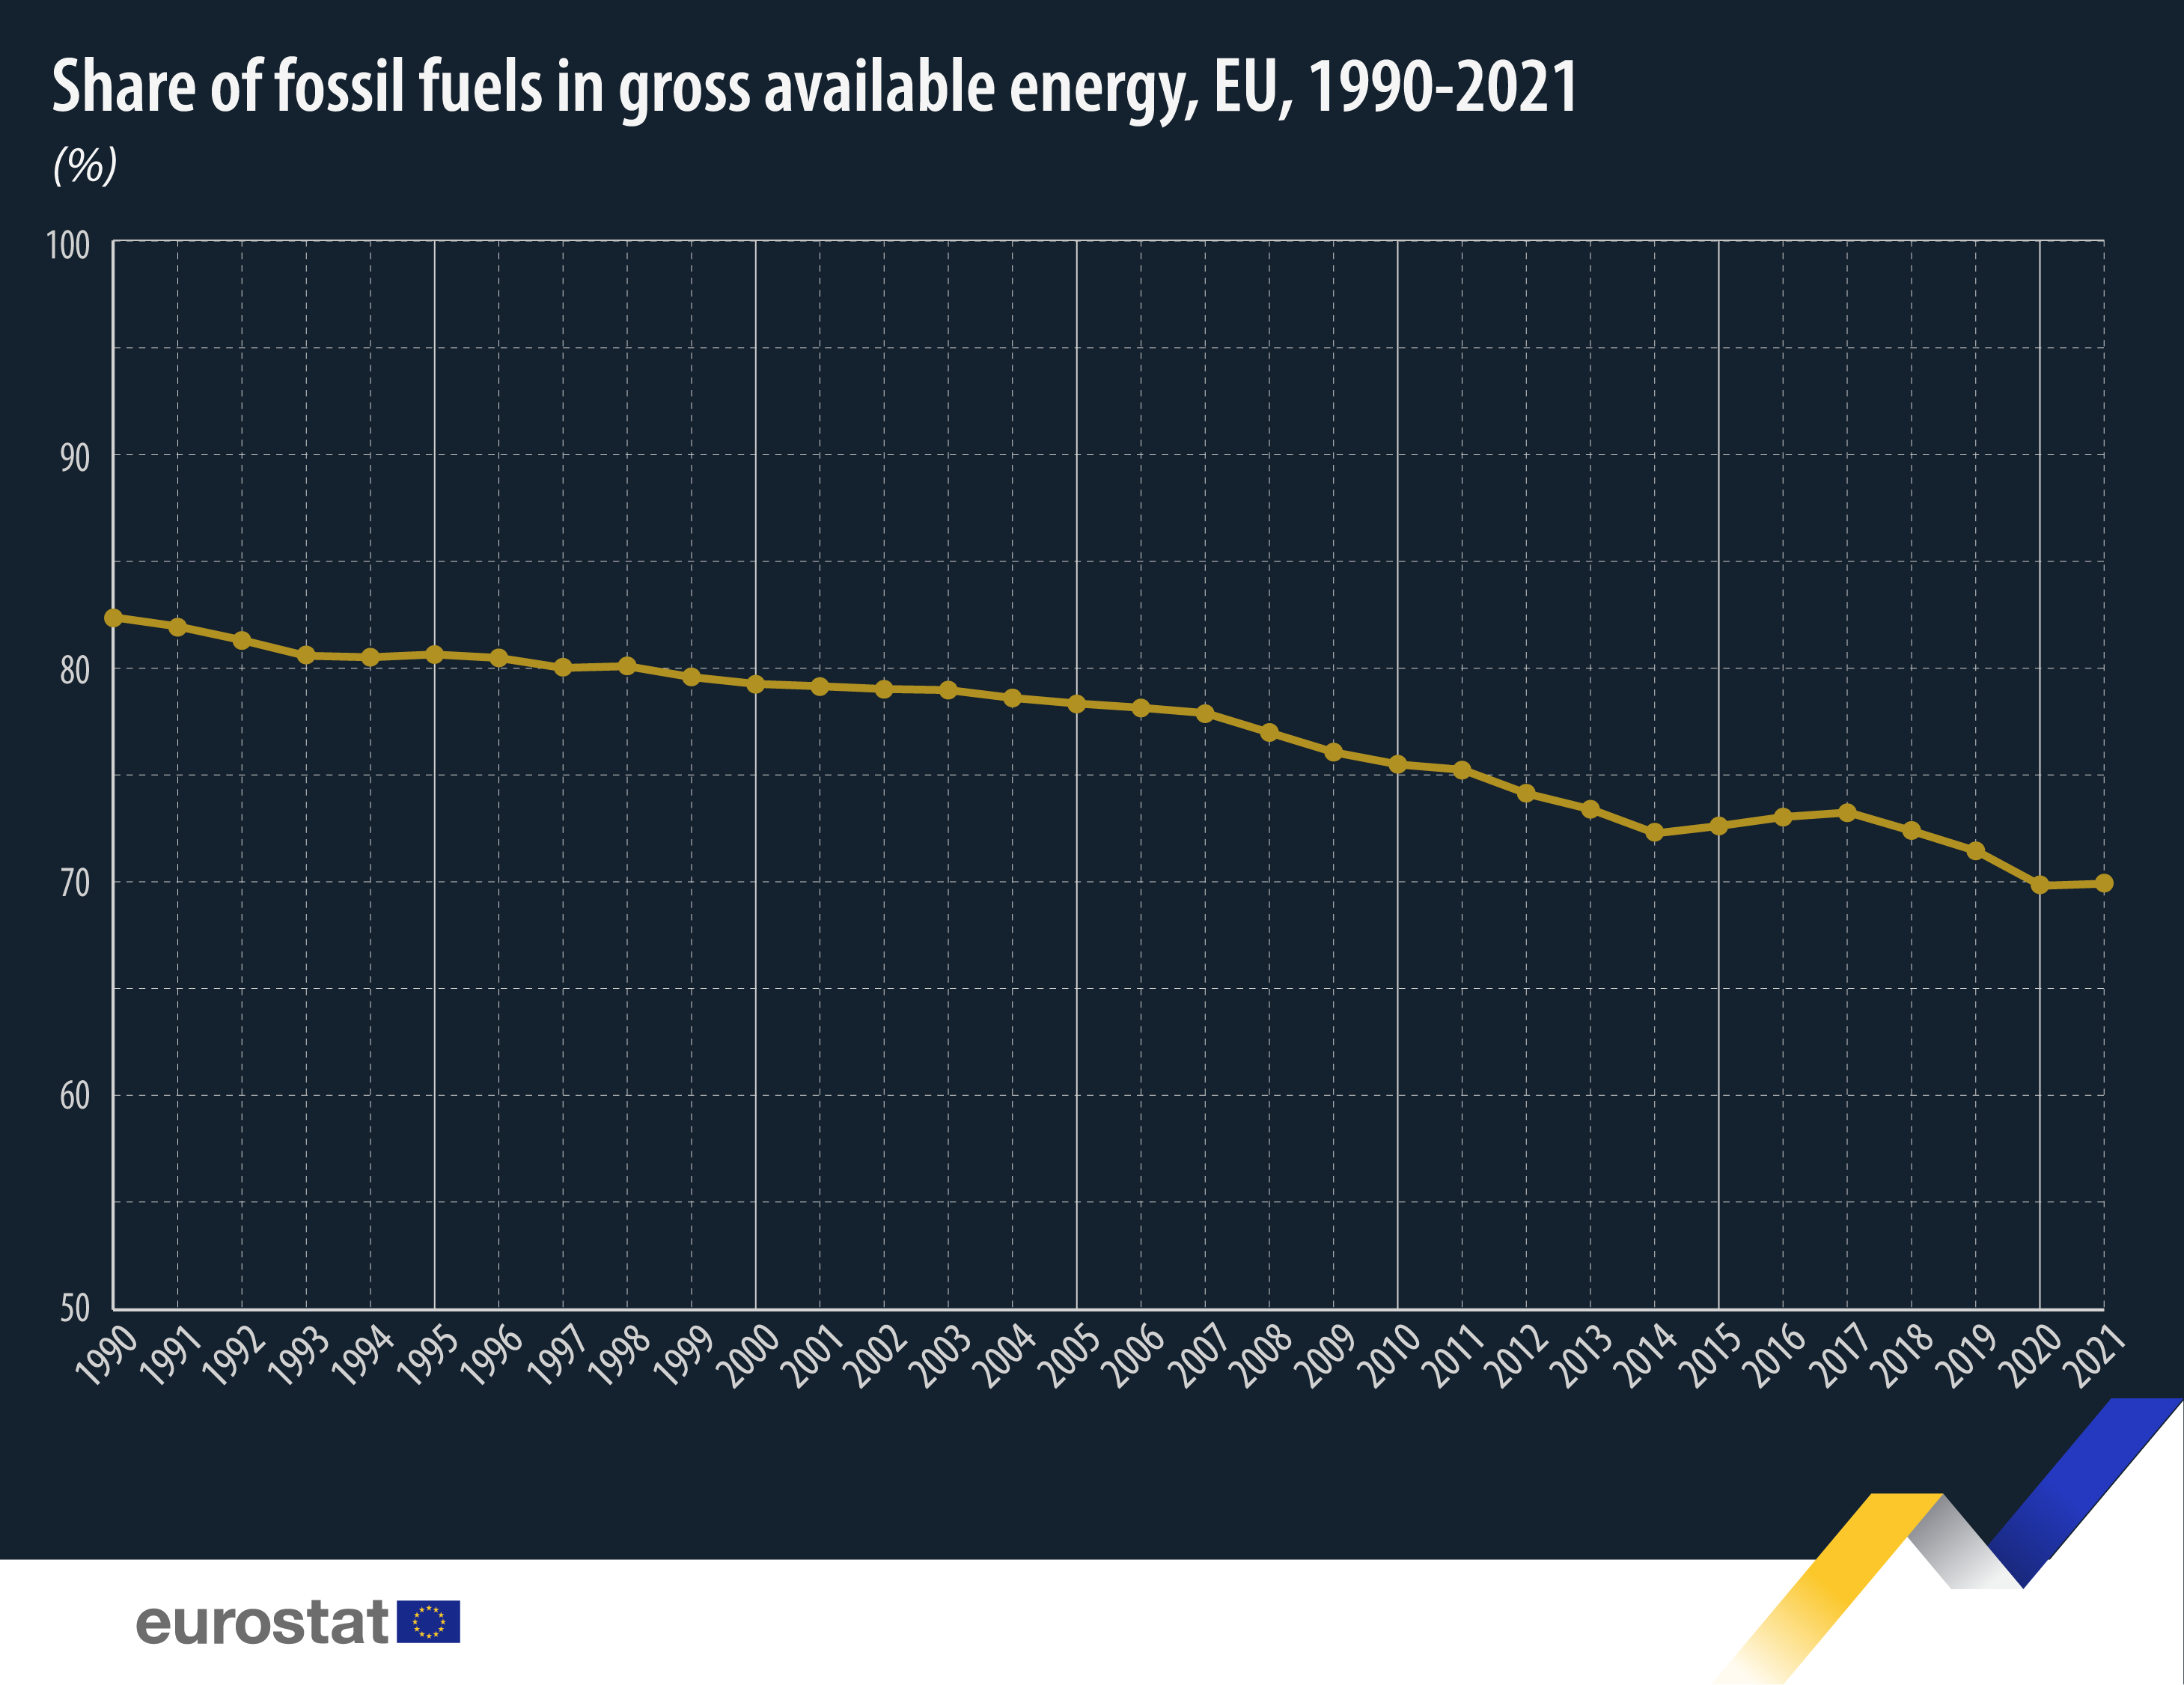 Line graph: Share of fossil fuels in gross available energy, %, EU, 1990-2021